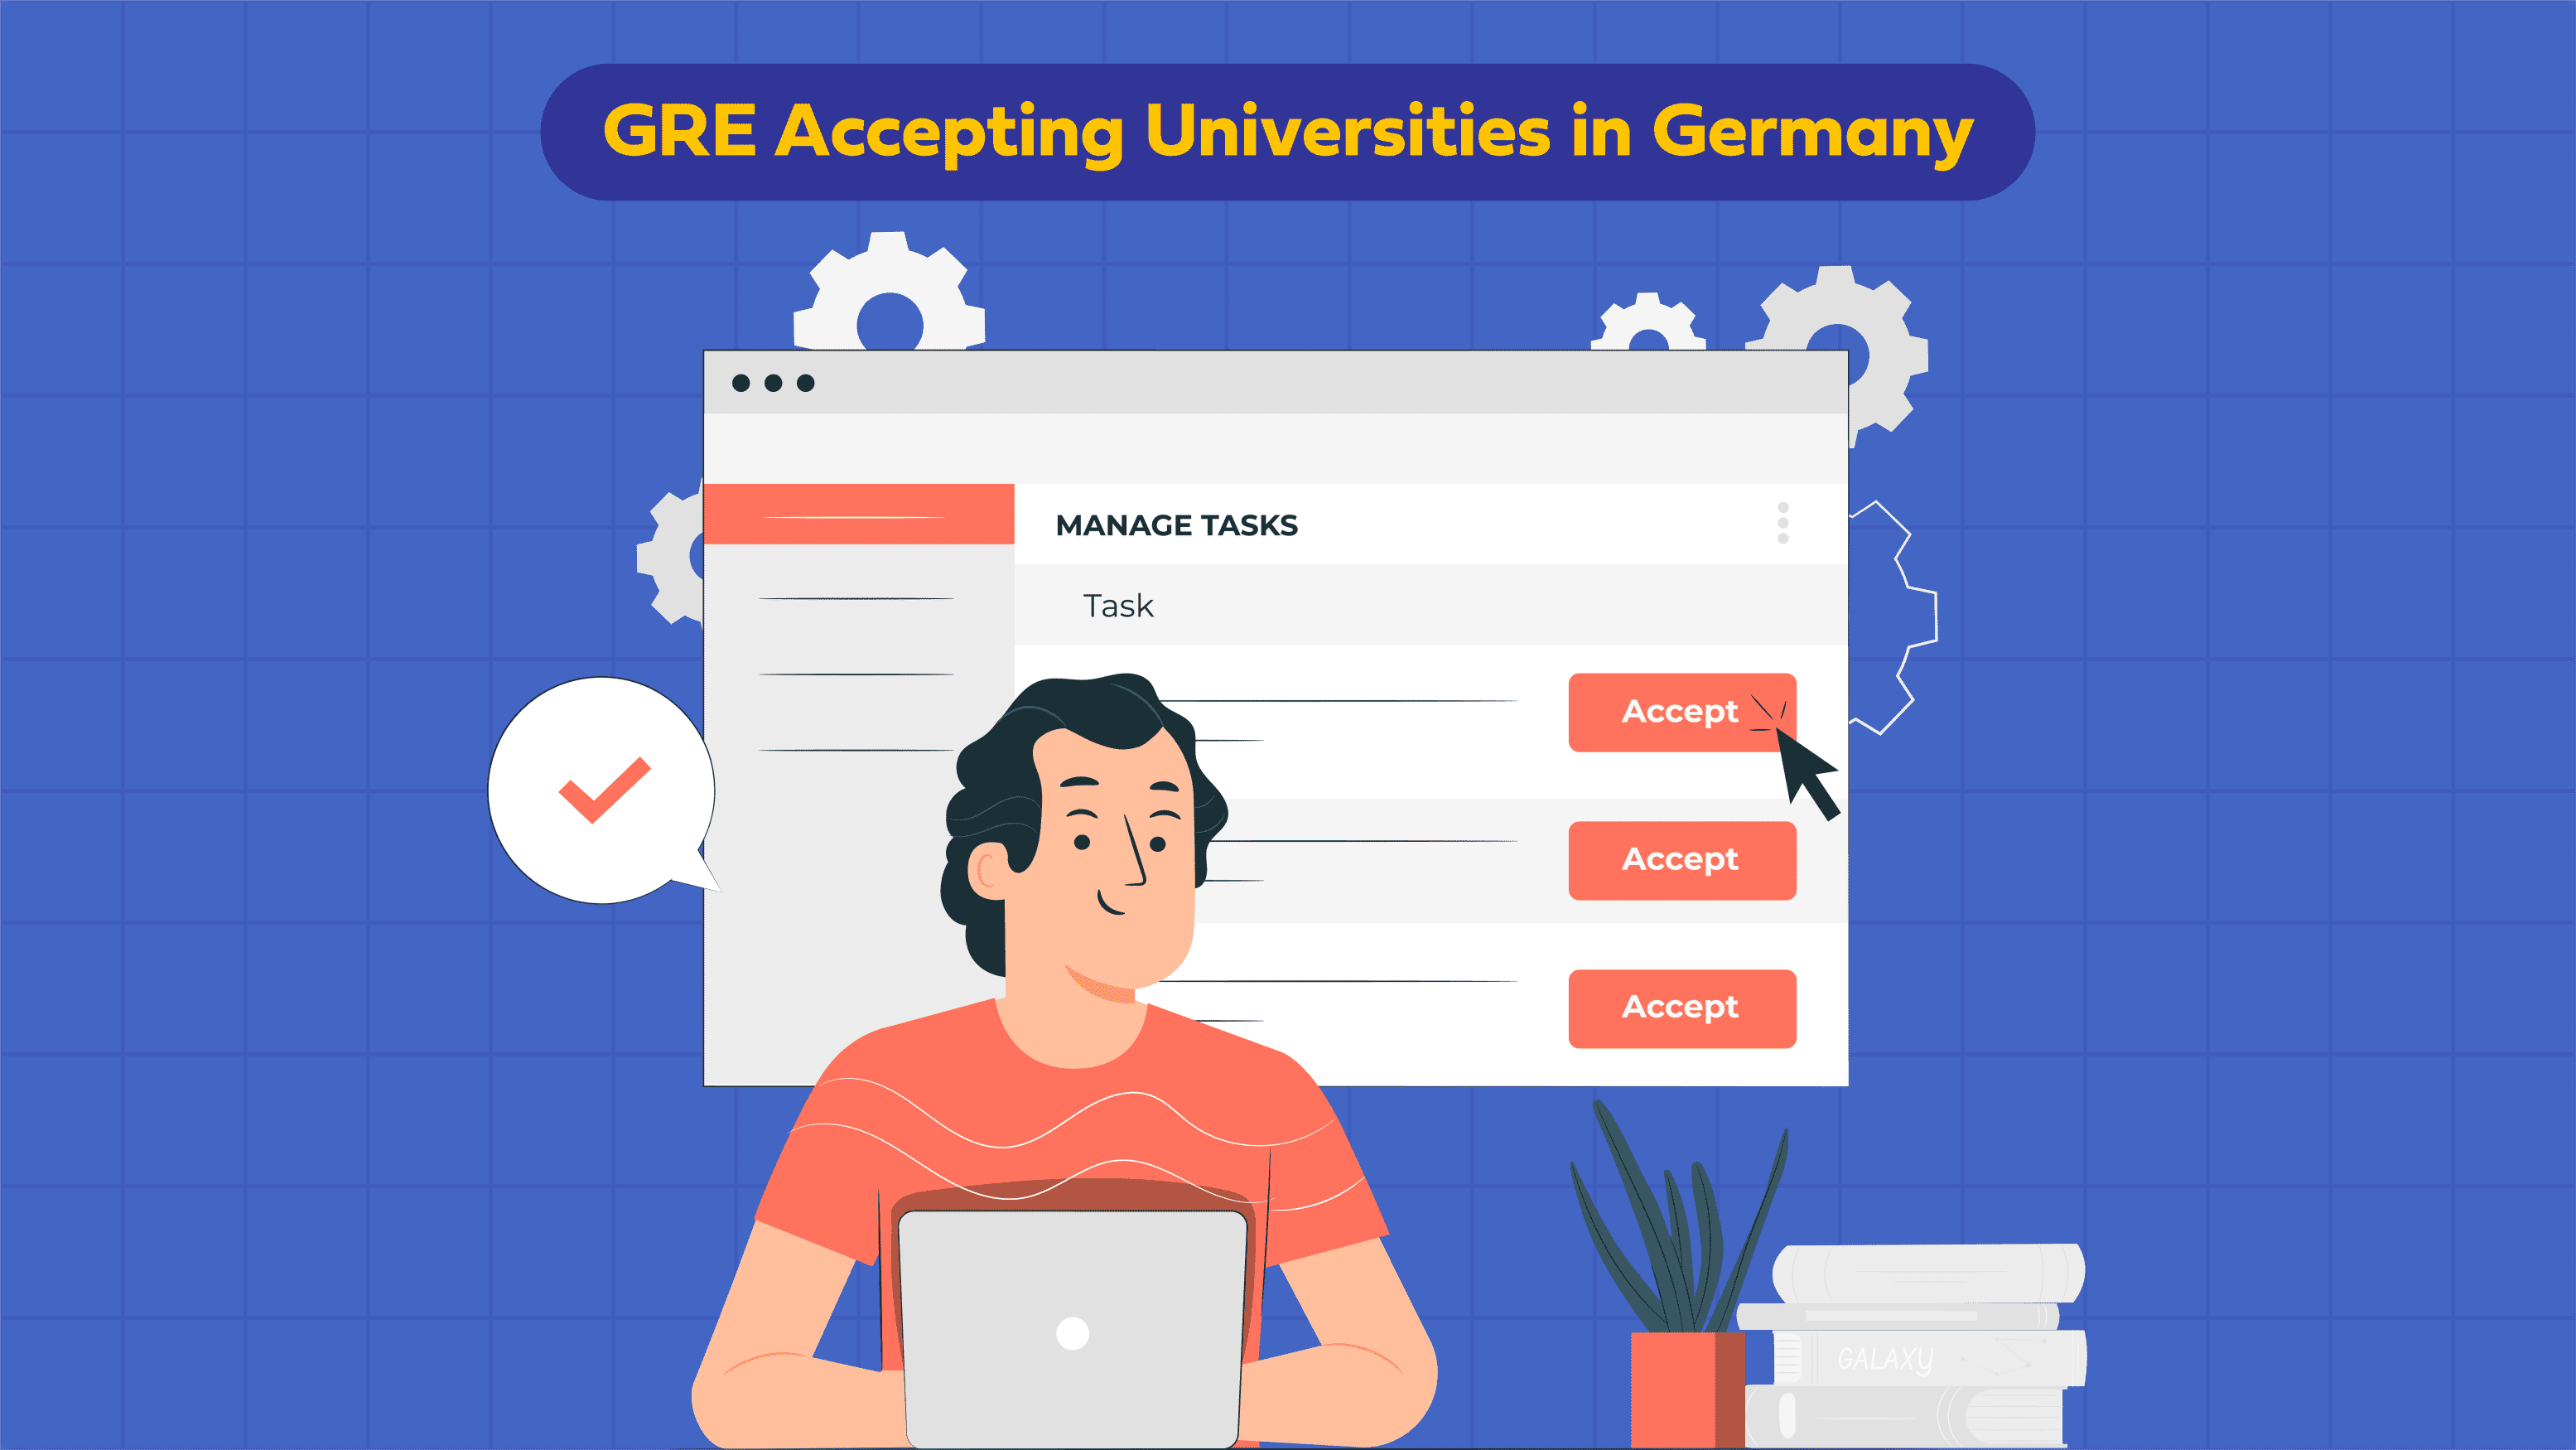 GRE Accepting Universities in Germany